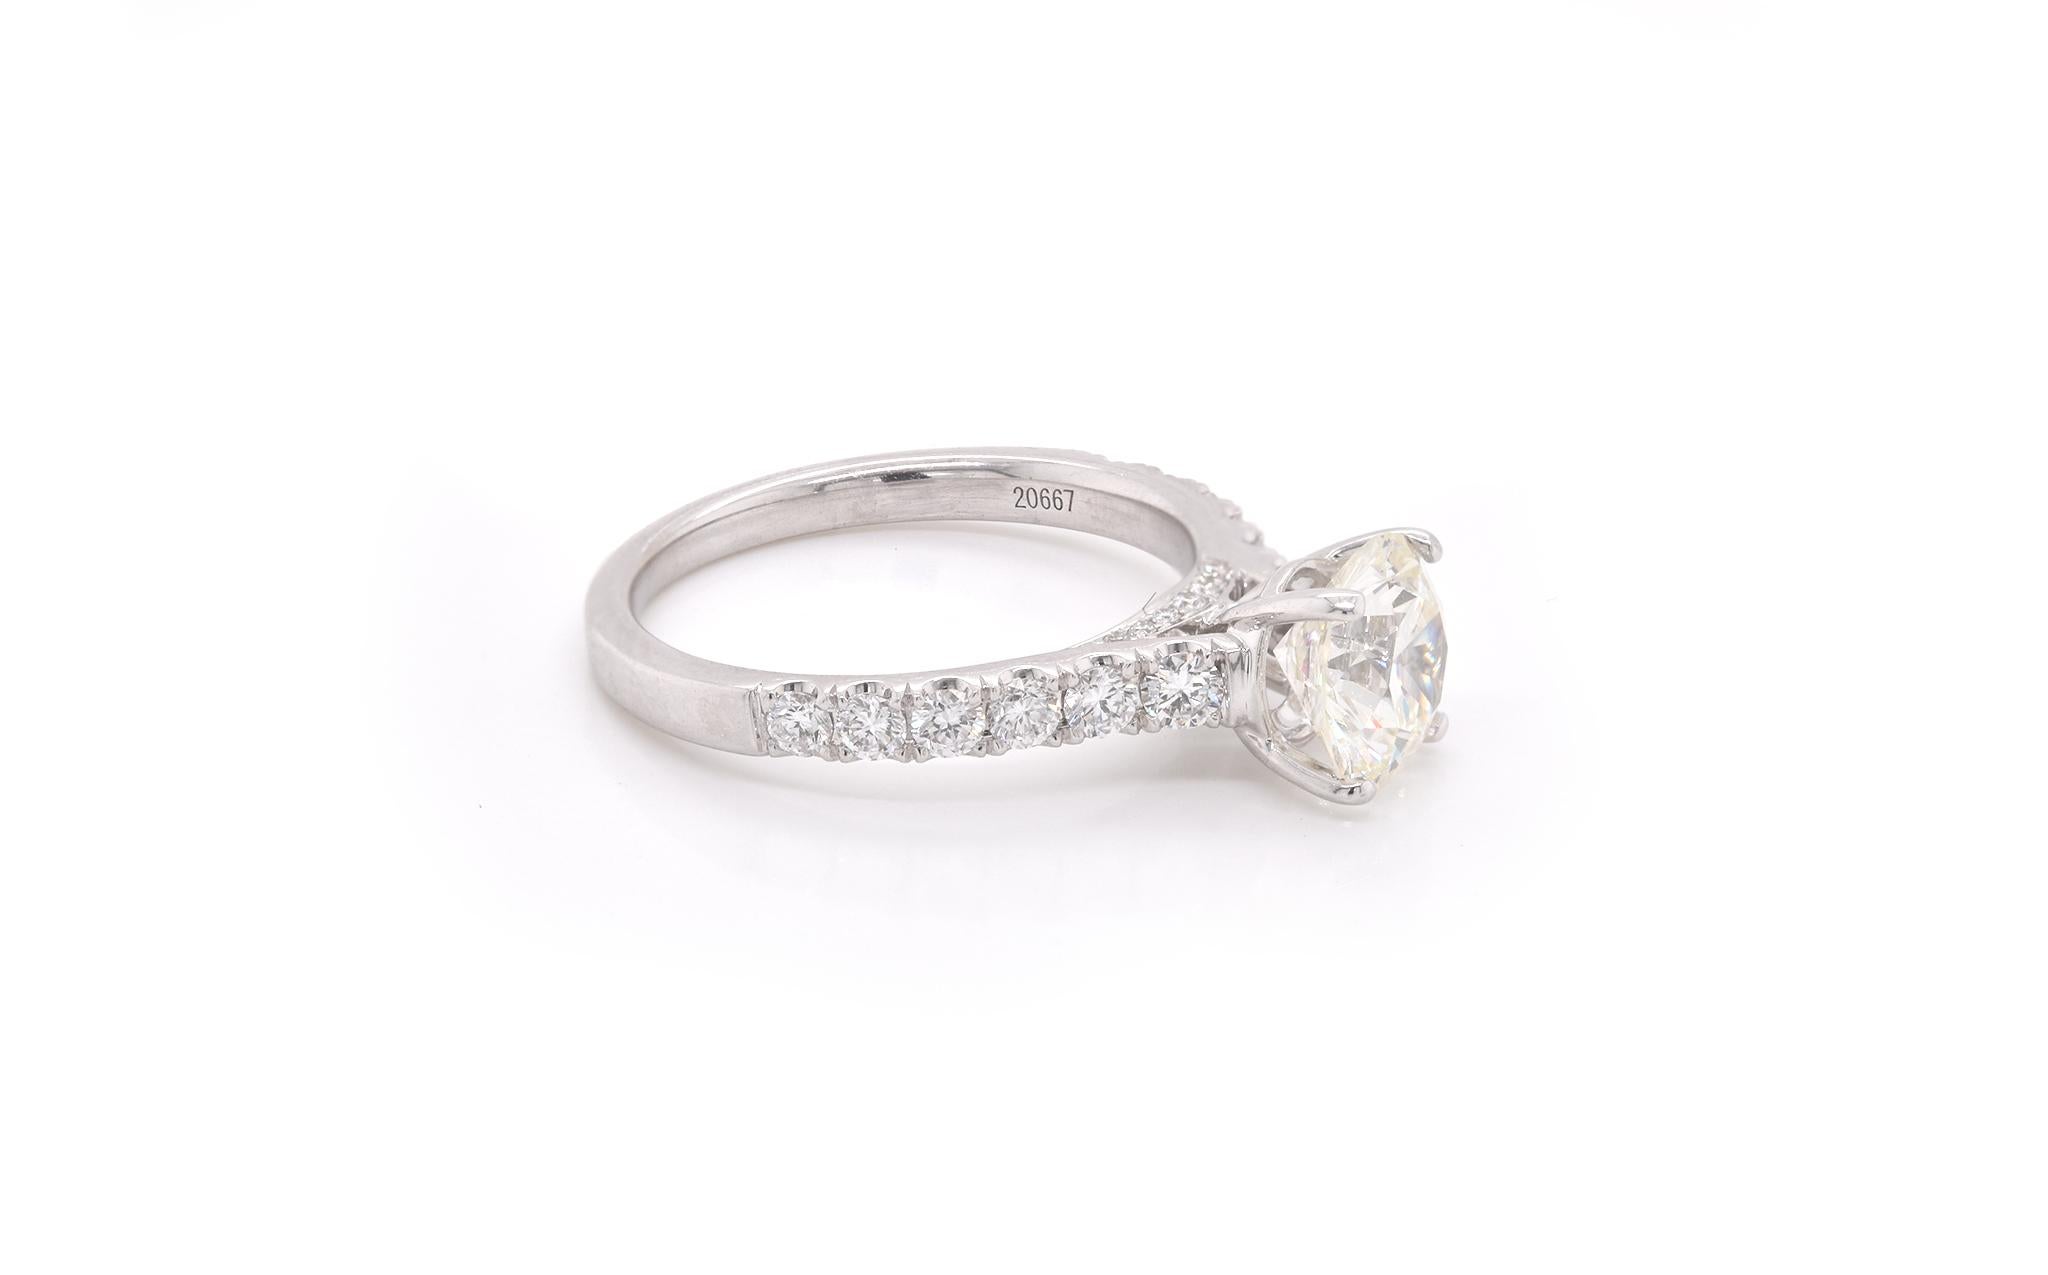 Material: 14k white gold 
Center Diamond: 1 round brilliant cut = 1.59ct  
Color: K
Clarity: VVS1
Accent Diamonds: 22 round brilliant cuts = 0.22cttw 
Color: G
Clarity: VS2
Ring Size: 6 ½ (please allow two additional shipping days for sizing